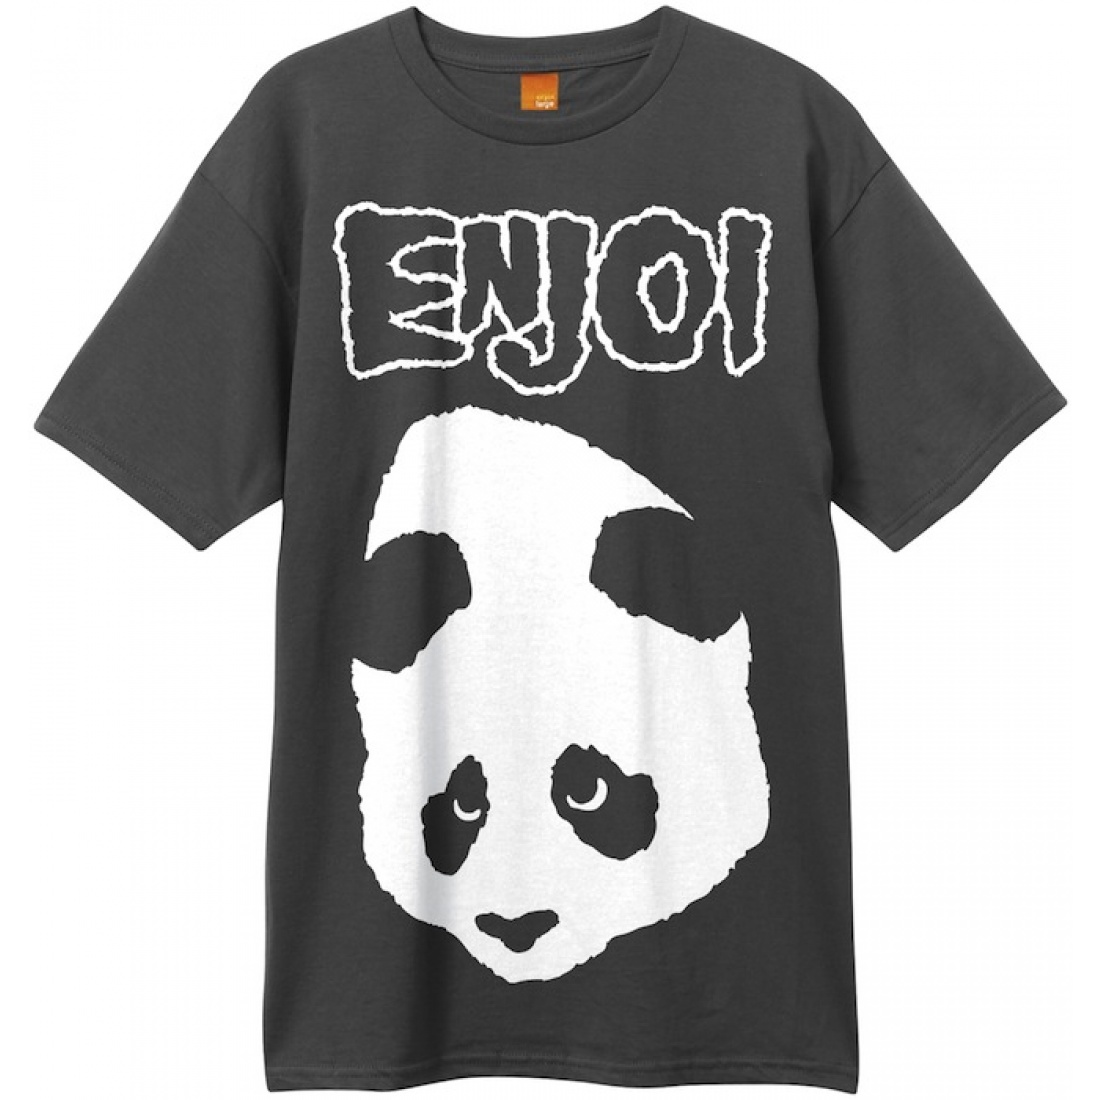 ENJ-Doesn't Fit Charcoal Tee